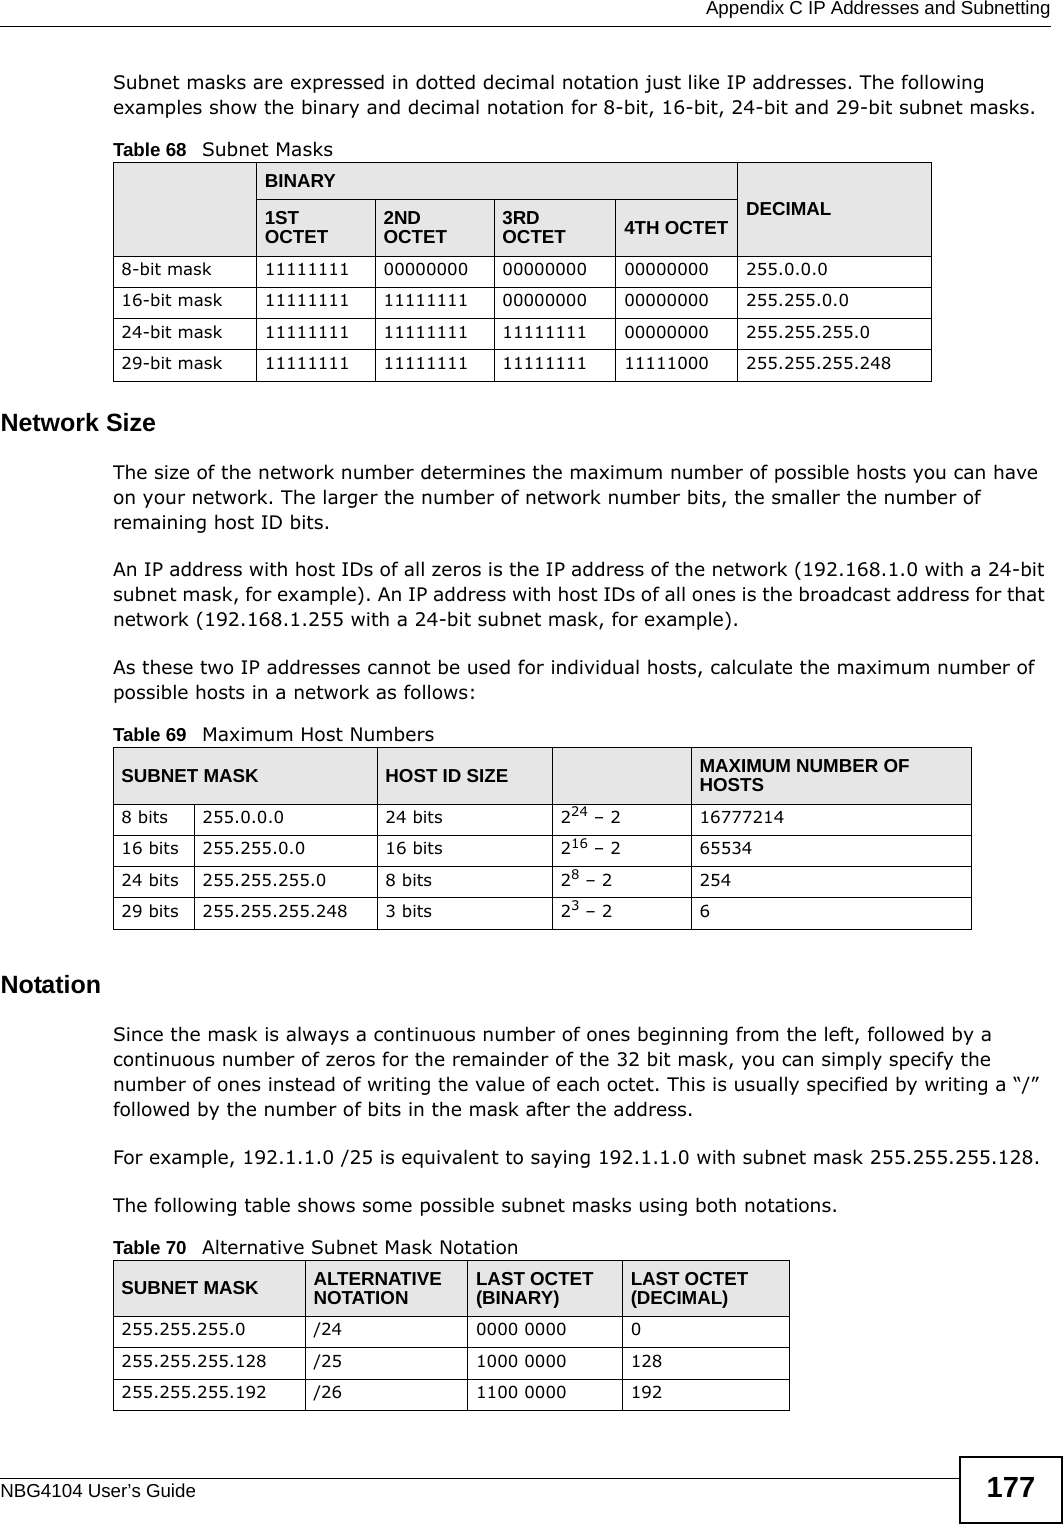  Appendix C IP Addresses and SubnettingNBG4104 User’s Guide 177Subnet masks are expressed in dotted decimal notation just like IP addresses. The following examples show the binary and decimal notation for 8-bit, 16-bit, 24-bit and 29-bit subnet masks. Network SizeThe size of the network number determines the maximum number of possible hosts you can have on your network. The larger the number of network number bits, the smaller the number of remaining host ID bits. An IP address with host IDs of all zeros is the IP address of the network (192.168.1.0 with a 24-bit subnet mask, for example). An IP address with host IDs of all ones is the broadcast address for that network (192.168.1.255 with a 24-bit subnet mask, for example).As these two IP addresses cannot be used for individual hosts, calculate the maximum number of possible hosts in a network as follows:NotationSince the mask is always a continuous number of ones beginning from the left, followed by a continuous number of zeros for the remainder of the 32 bit mask, you can simply specify the number of ones instead of writing the value of each octet. This is usually specified by writing a “/” followed by the number of bits in the mask after the address. For example, 192.1.1.0 /25 is equivalent to saying 192.1.1.0 with subnet mask 255.255.255.128. The following table shows some possible subnet masks using both notations. Table 68   Subnet MasksBINARYDECIMAL1ST OCTET 2ND OCTET 3RD OCTET 4TH OCTET8-bit mask 11111111 00000000 00000000 00000000 255.0.0.016-bit mask 11111111 11111111 00000000 00000000 255.255.0.024-bit mask 11111111 11111111 11111111 00000000 255.255.255.029-bit mask 11111111 11111111 11111111 11111000 255.255.255.248Table 69   Maximum Host NumbersSUBNET MASK HOST ID SIZE MAXIMUM NUMBER OF HOSTS8 bits 255.0.0.0 24 bits 224 – 2 1677721416 bits 255.255.0.0 16 bits 216 – 2 6553424 bits 255.255.255.0 8 bits 28 – 2 25429 bits 255.255.255.248 3 bits 23 – 2 6Table 70   Alternative Subnet Mask NotationSUBNET MASK ALTERNATIVE NOTATION LAST OCTET (BINARY) LAST OCTET (DECIMAL)255.255.255.0 /24 0000 0000 0255.255.255.128 /25 1000 0000 128255.255.255.192 /26 1100 0000 192